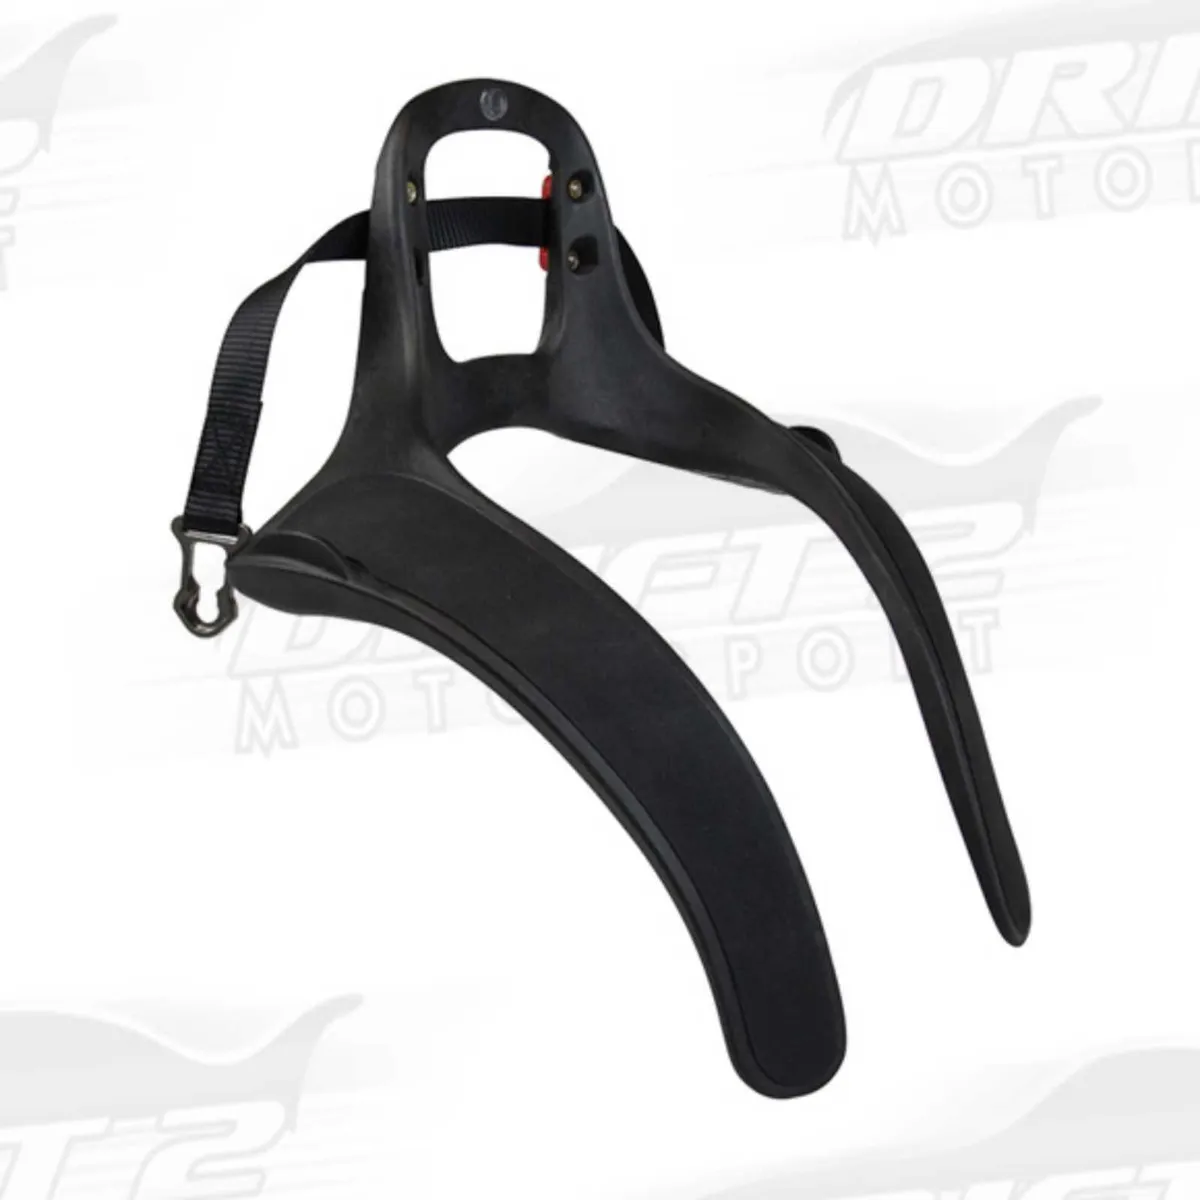 Stand21 Hans Device - Image 1